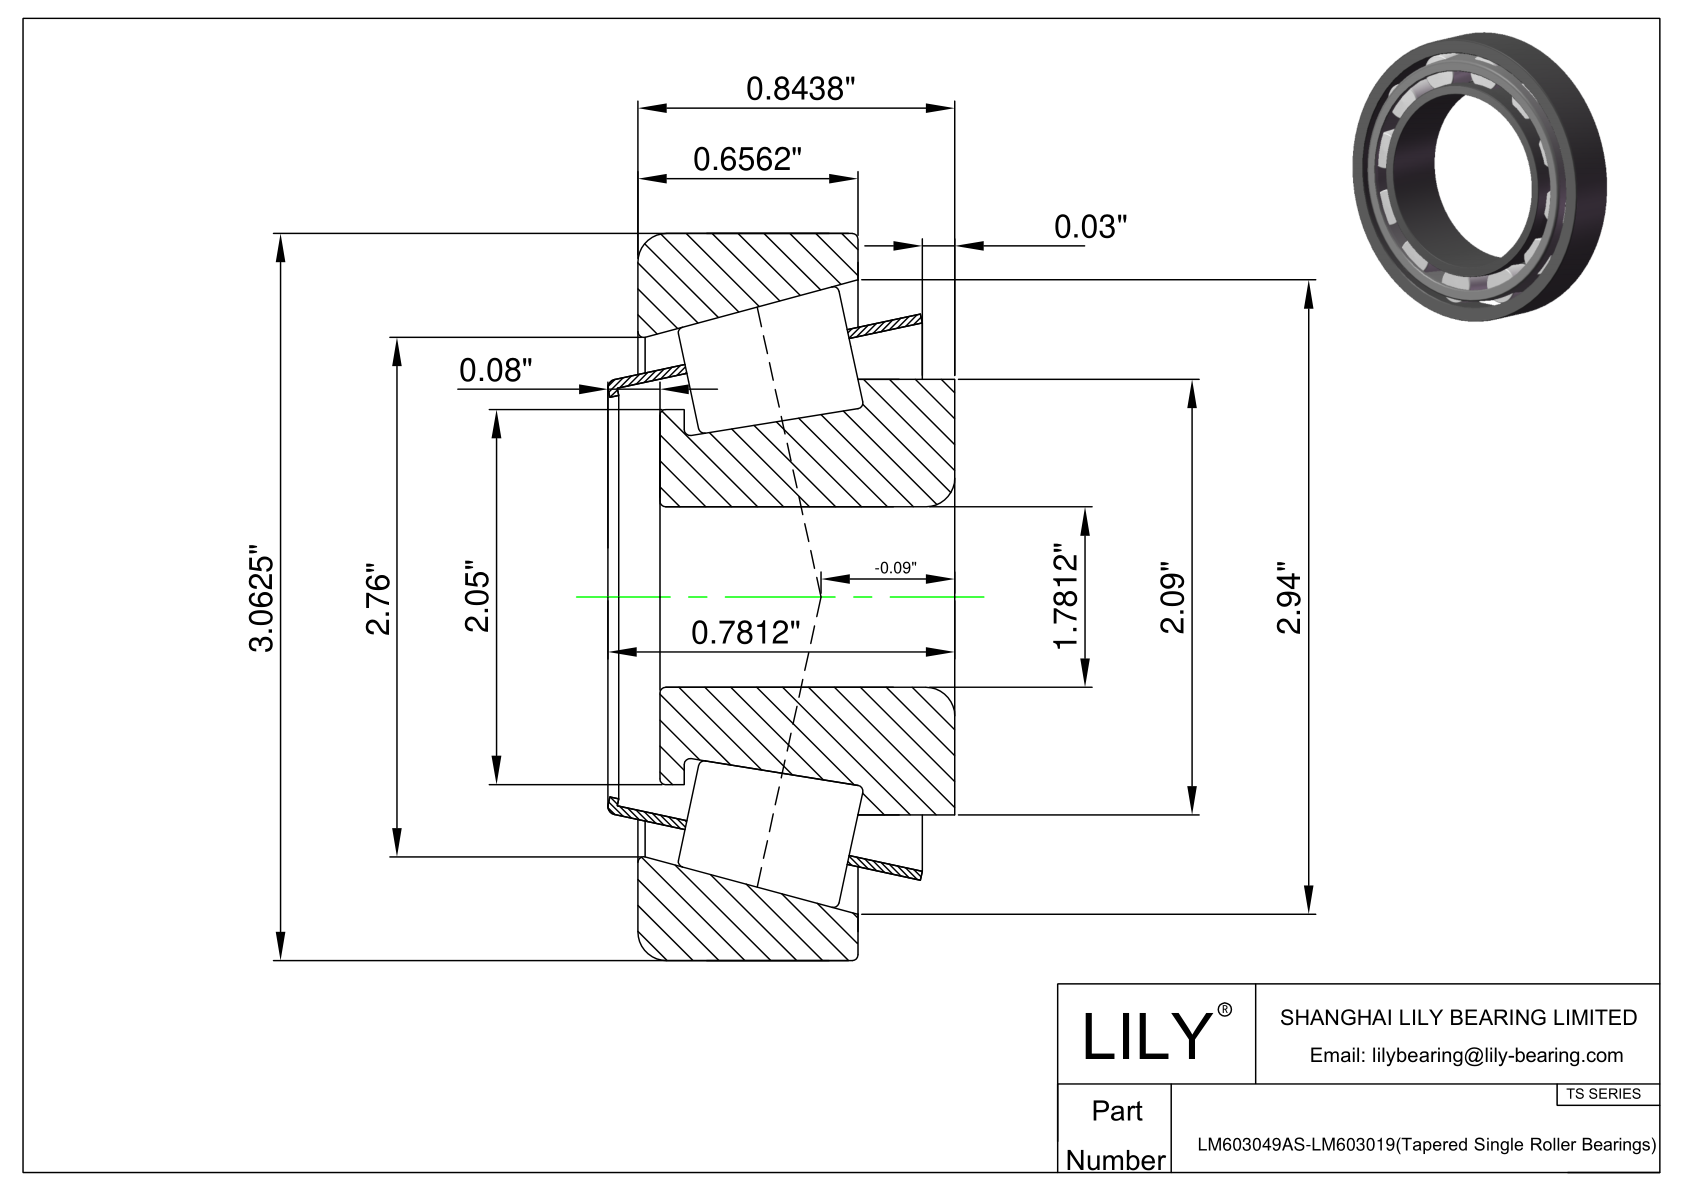 LM603049AS-LM603019 TS (Tapered Single Roller Bearings) (Imperial) cad drawing